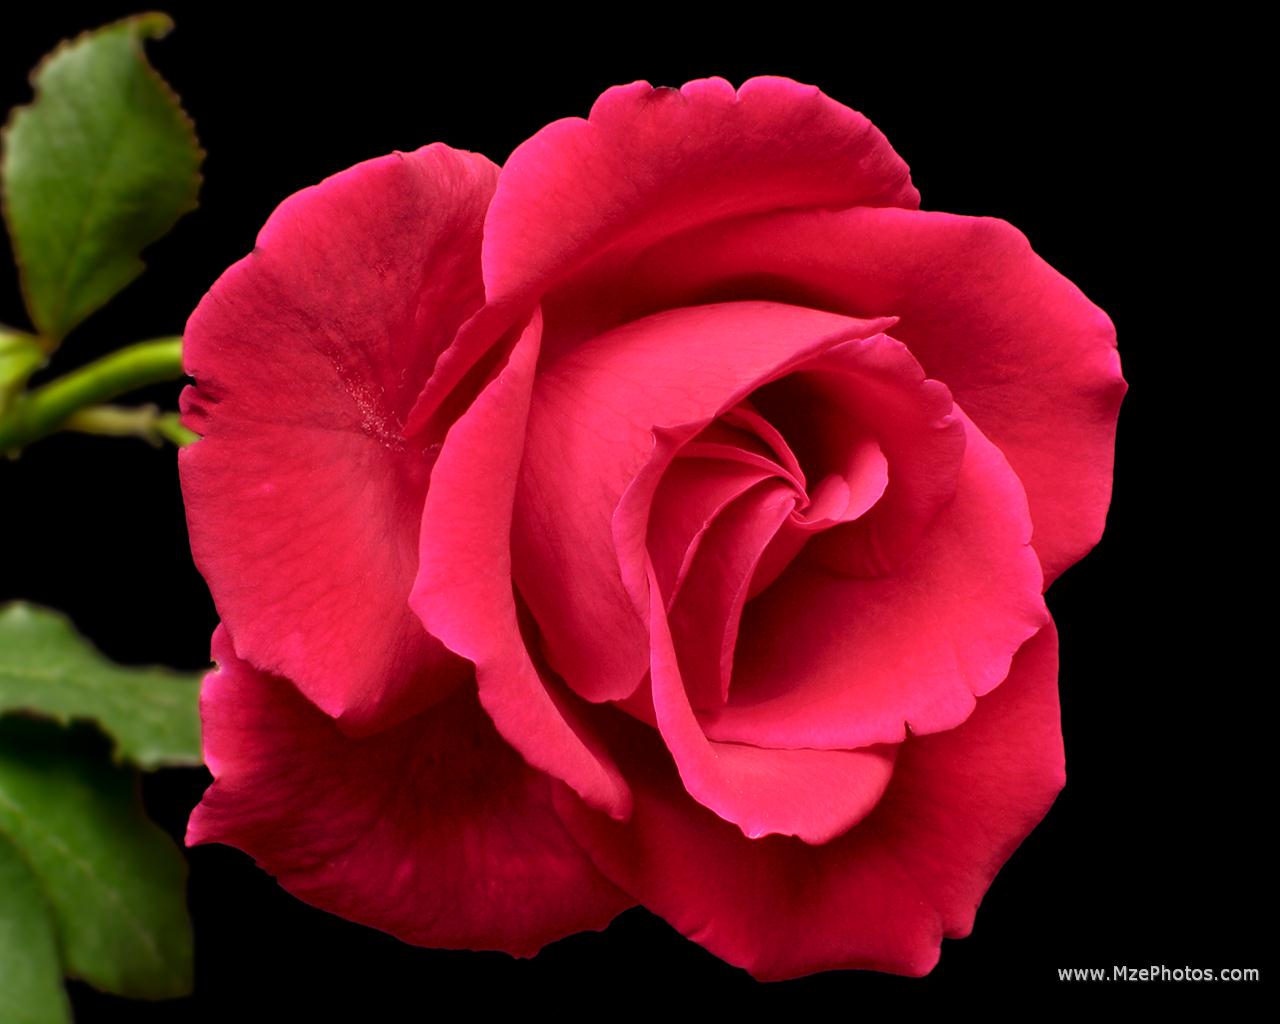 Flower Wallpapers Flower Pictures Red Rose Flowers Gifts